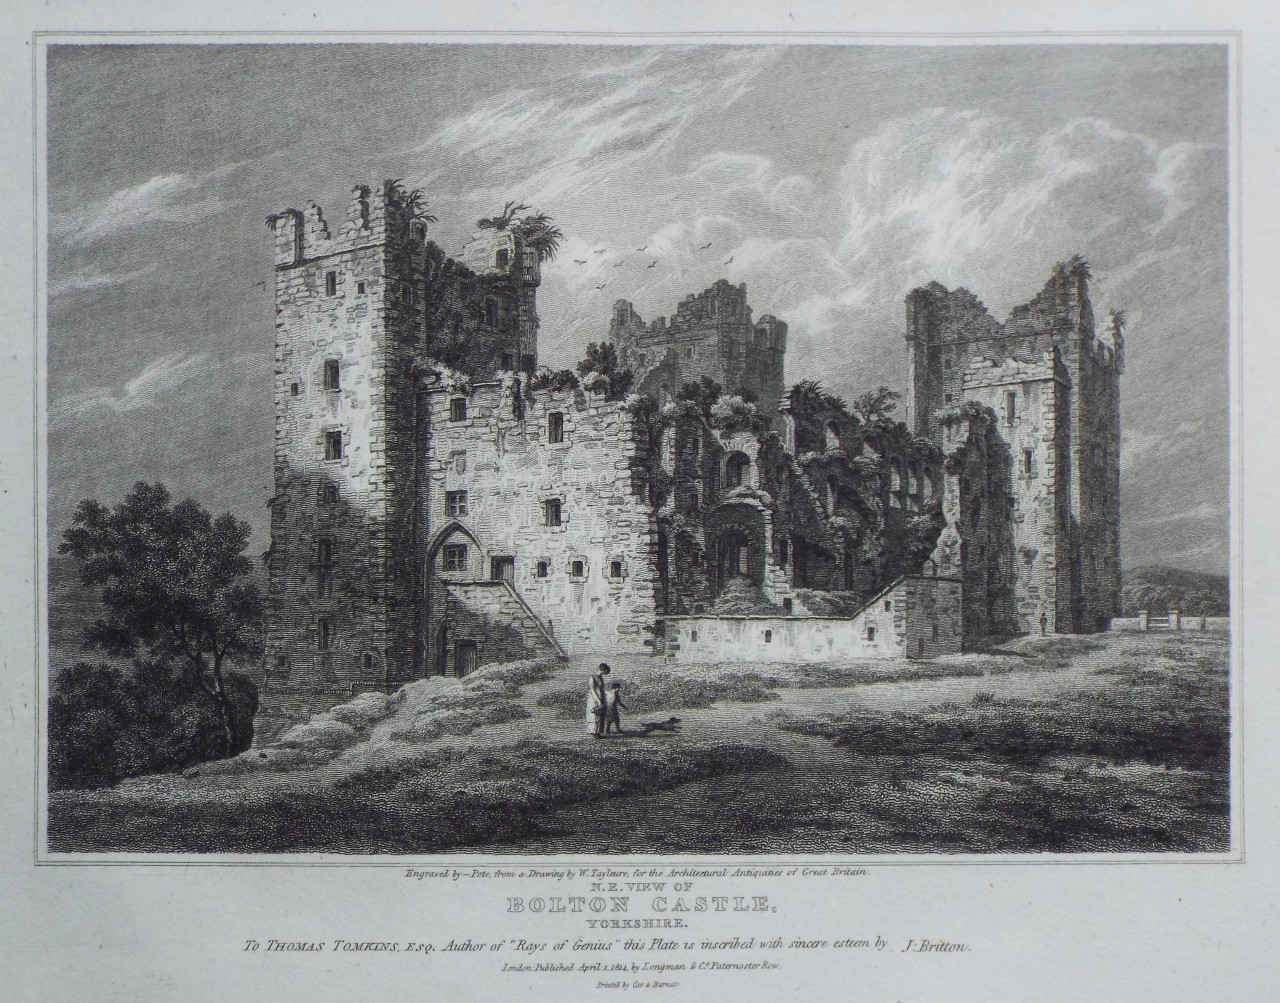 Print - N. E. View of Bolton Castle, Yorkshire. - 